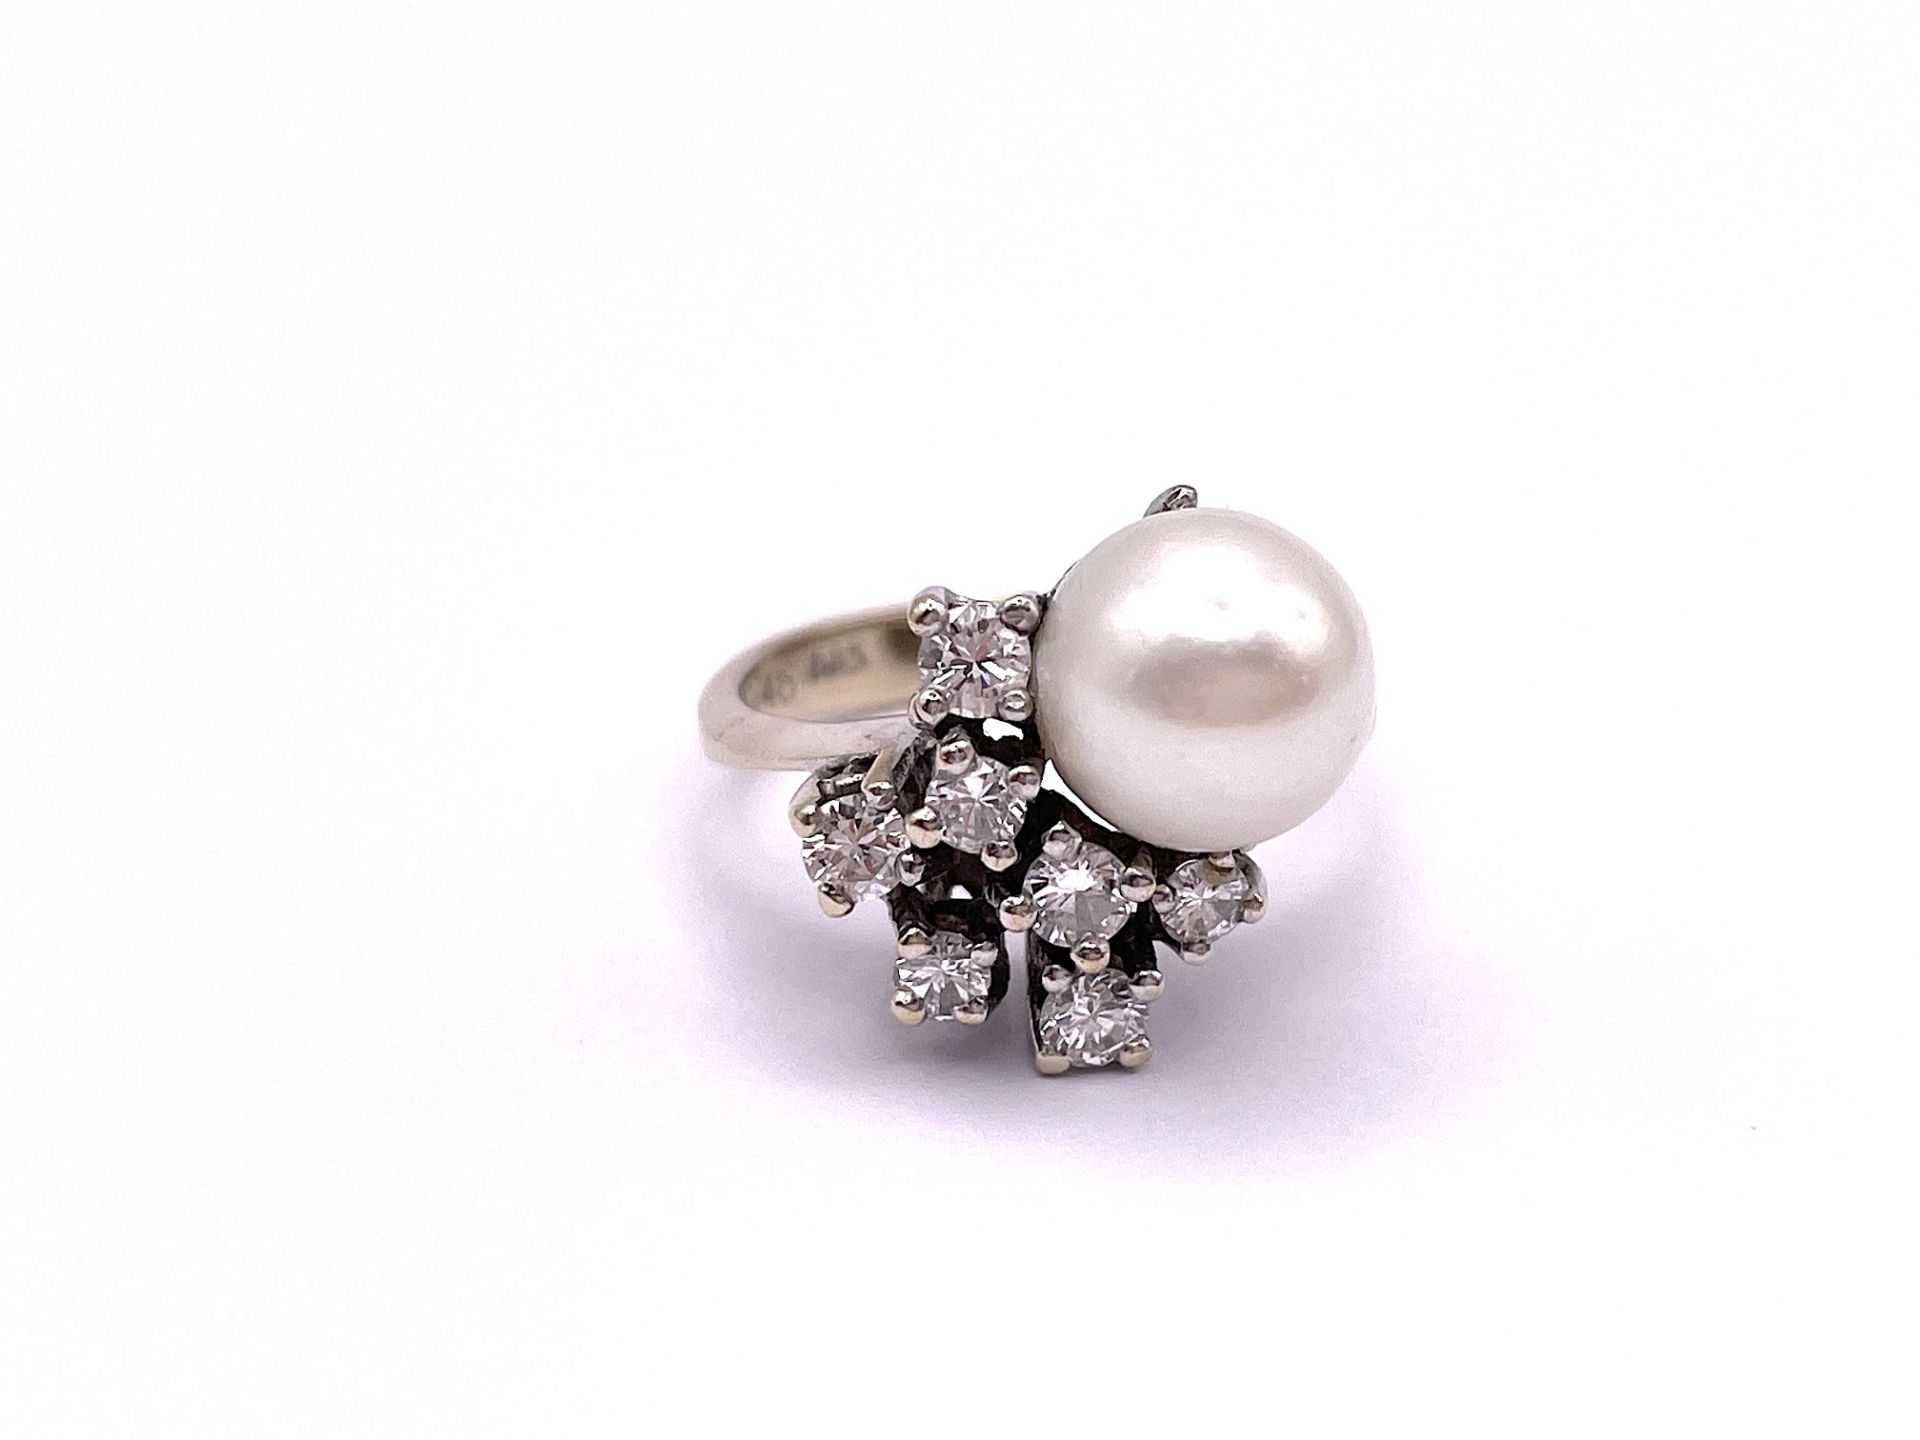 Pearl ring - Image 4 of 7